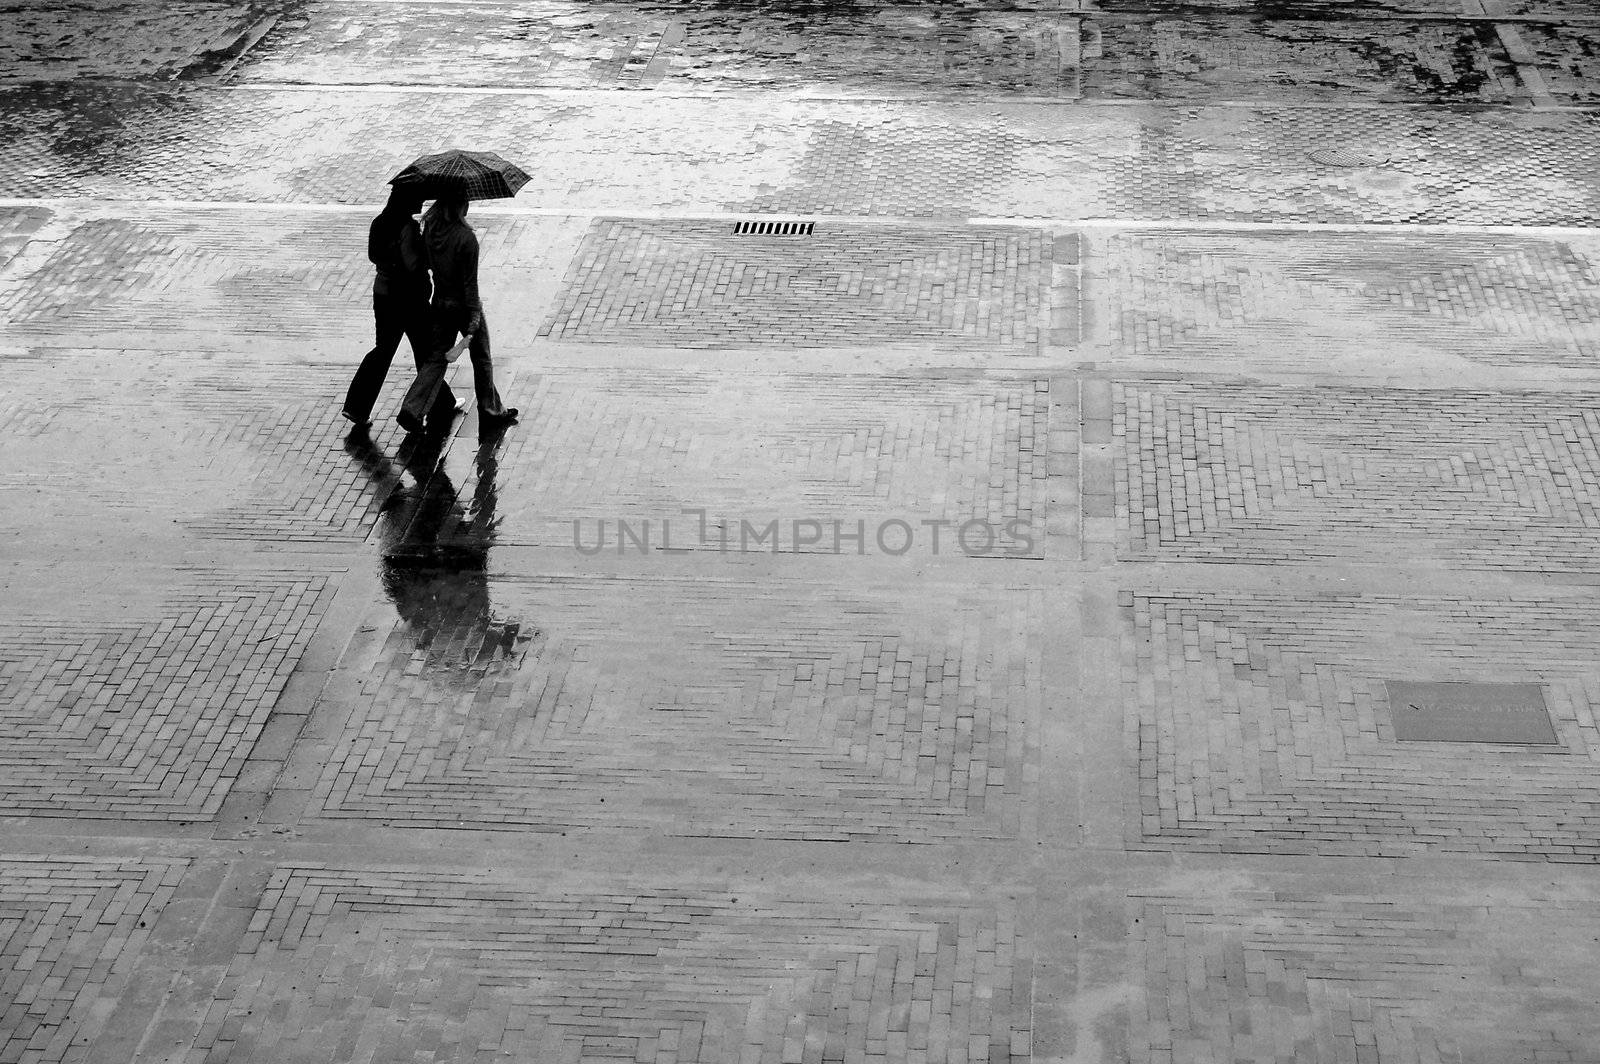 Alone in the rain by photocreo